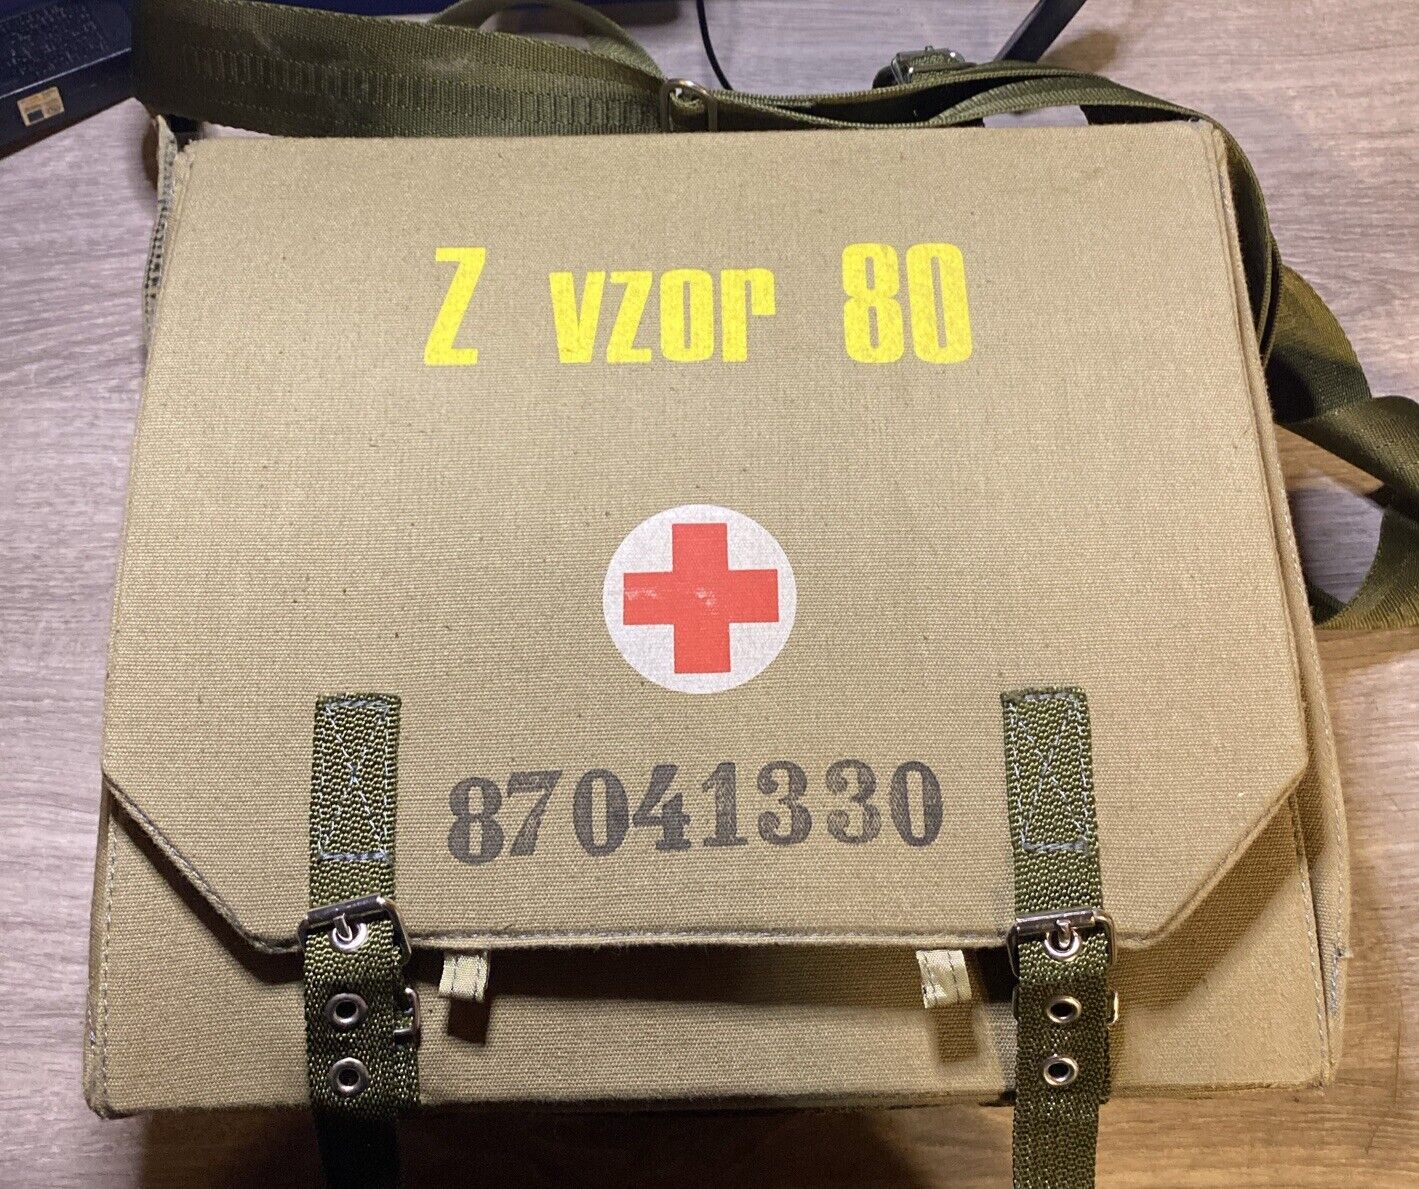 MILITARY CZECH ARMY Z vzor 80 FIRST AID KIT GREEN SHOULDER Bag W/ Surgical Kit